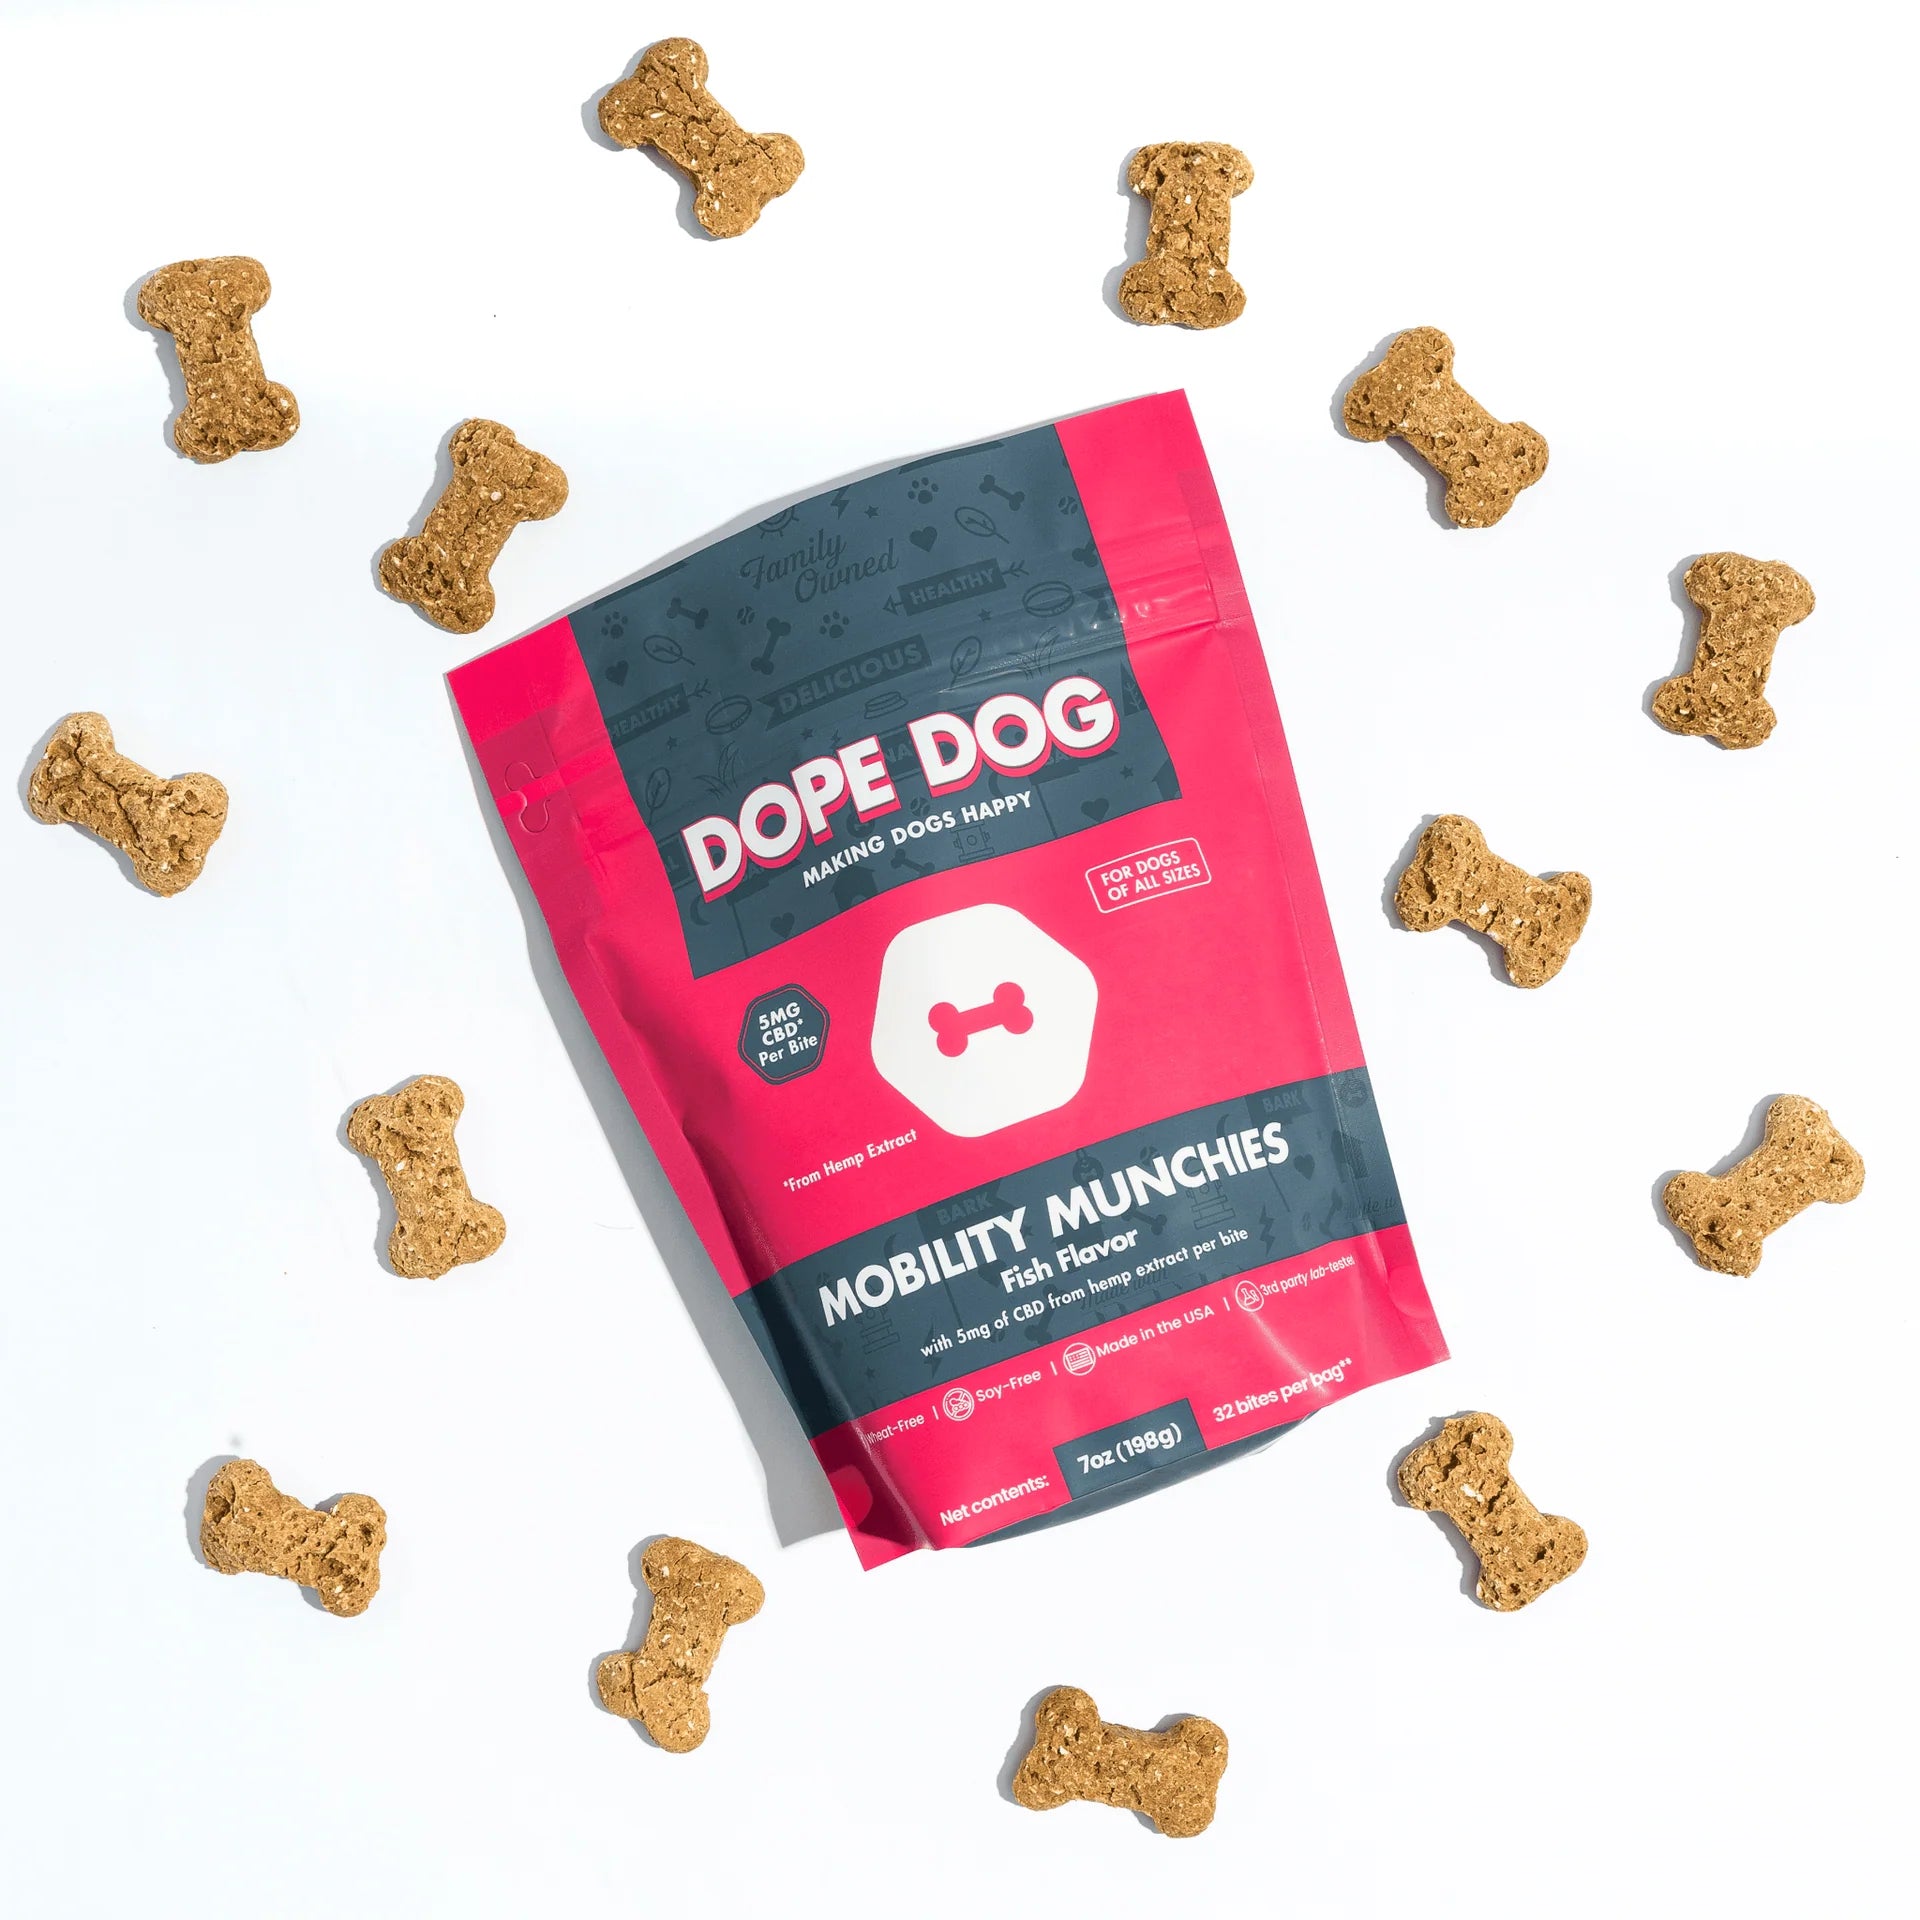 Dope Dog, Mobility Munchies CBD Dog Treats, Fish Flavor, Hip & Joint Support, 7oz, 160mg CBD